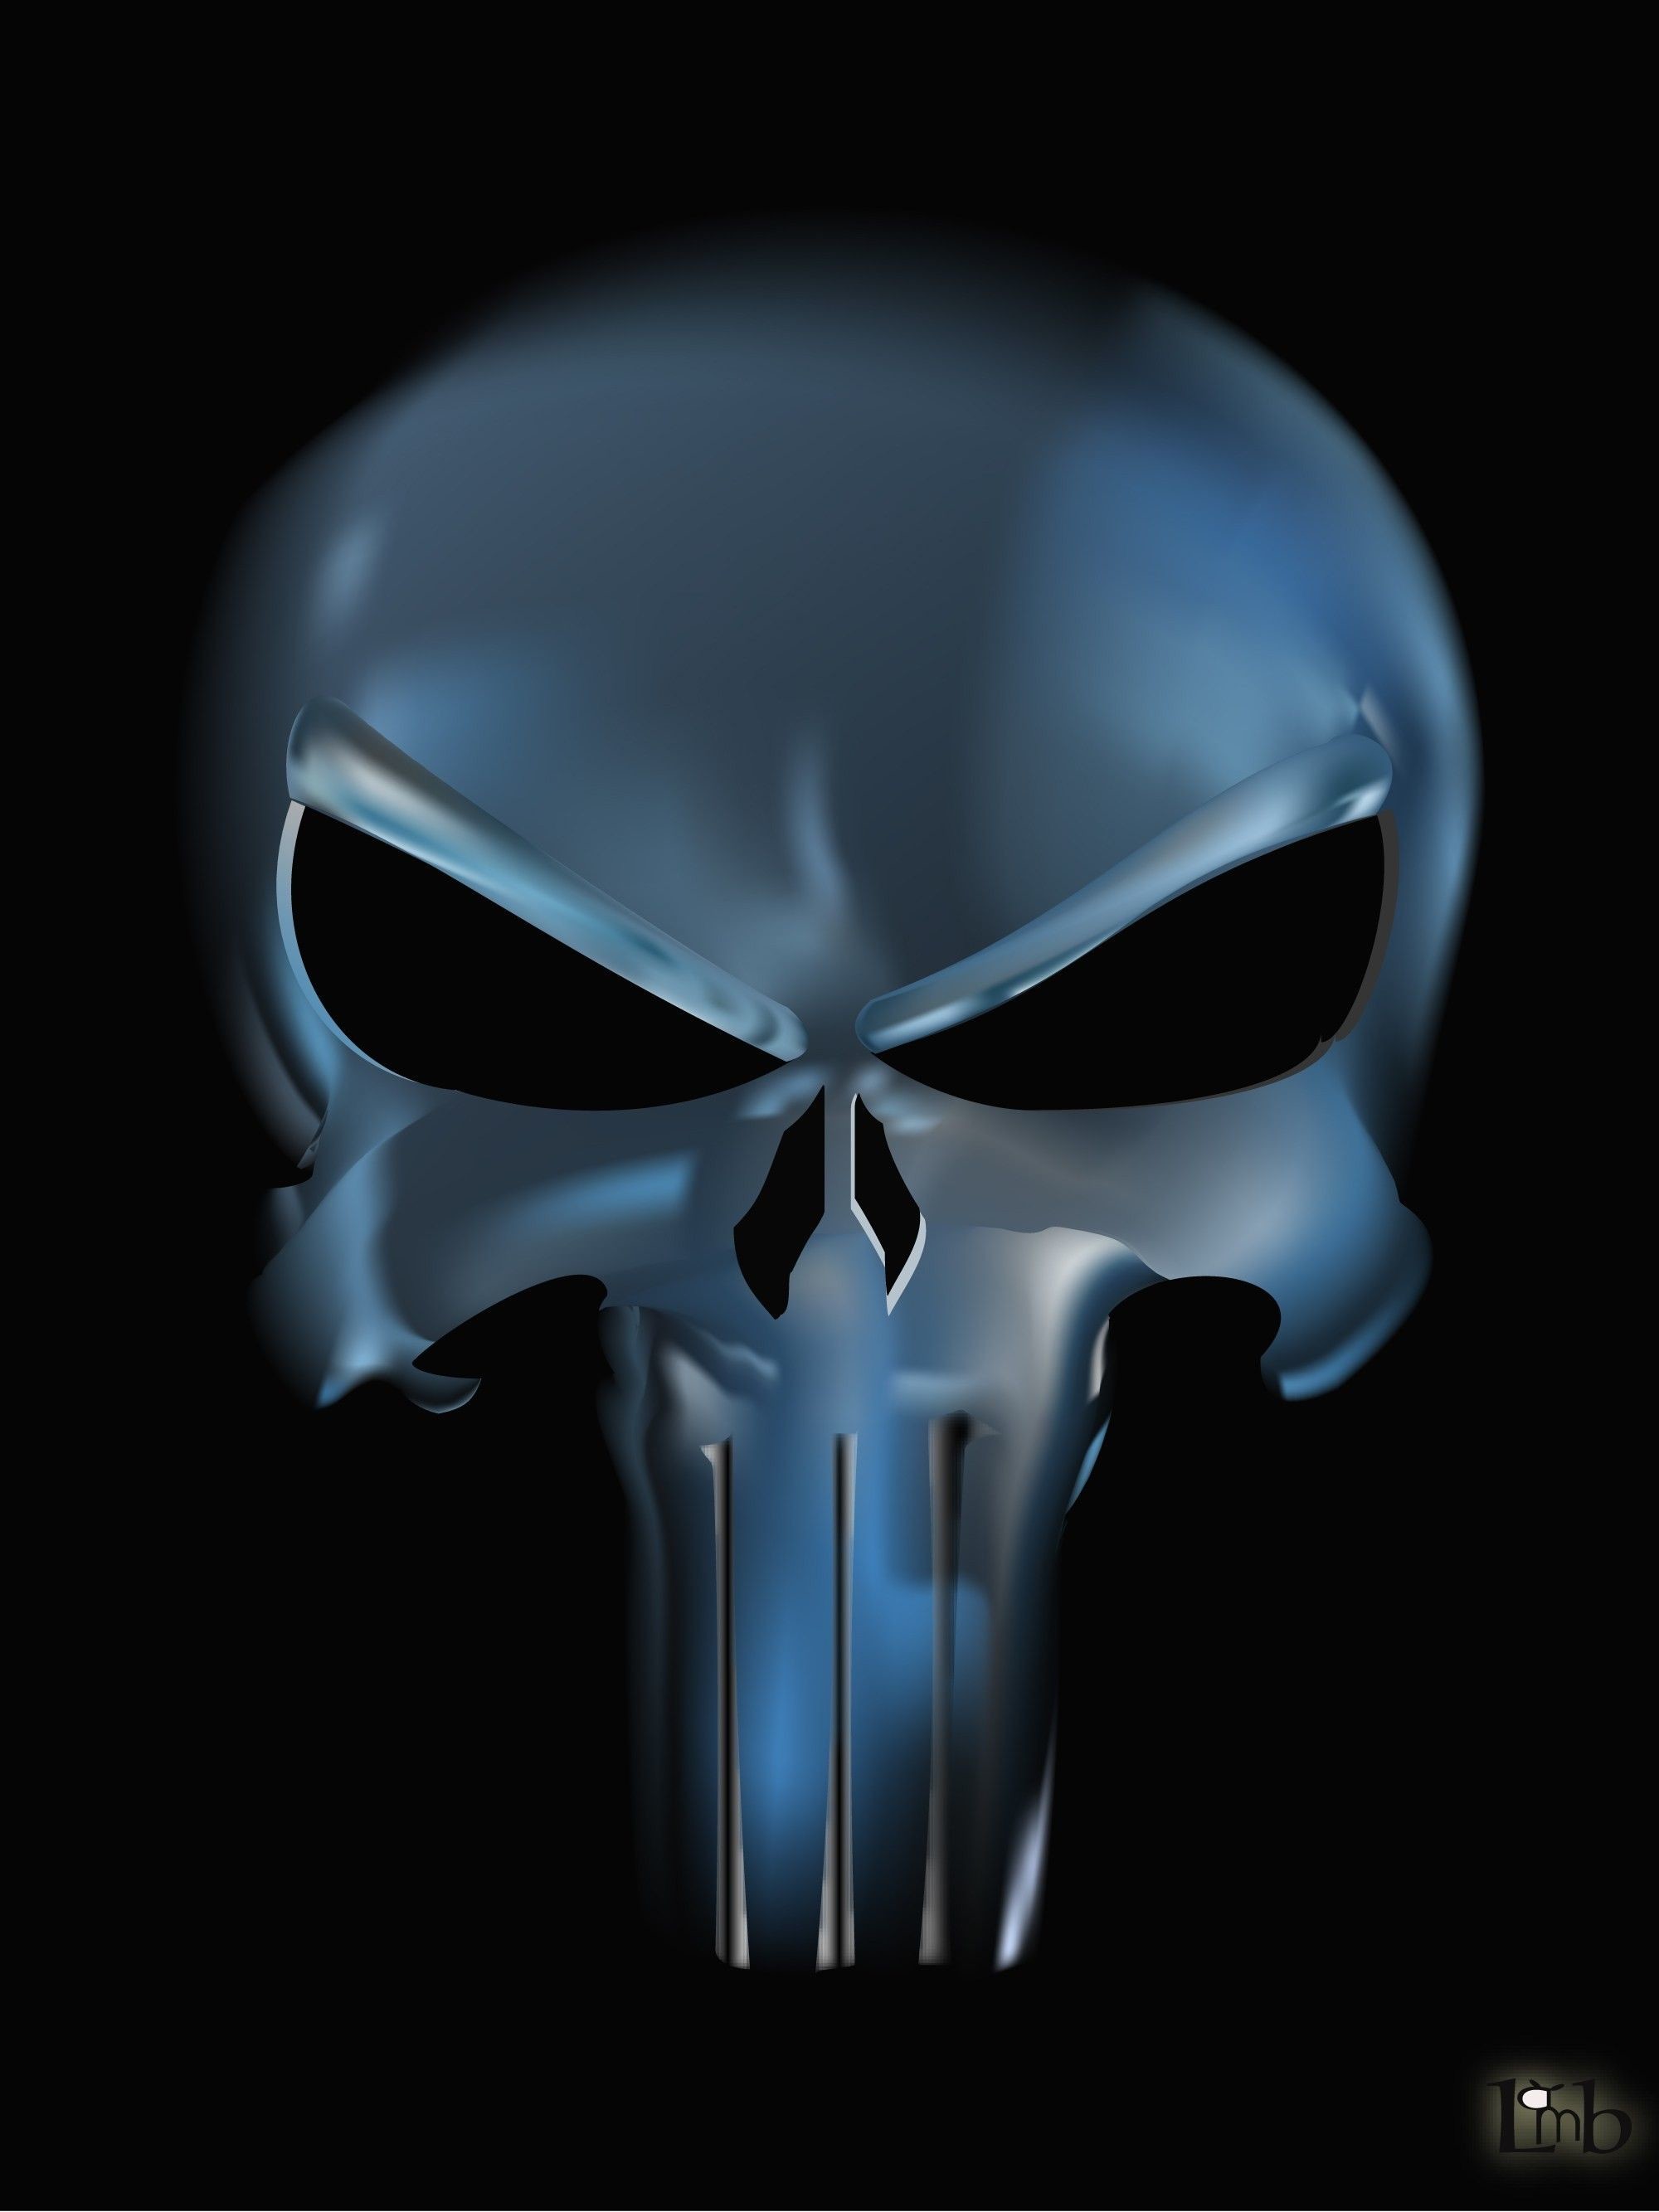 2000x2667 Amazing The Punisher Skull Wallpaper Amazing Free Hd 3d Wallpapers Collection You Can Download Best 2000x2667